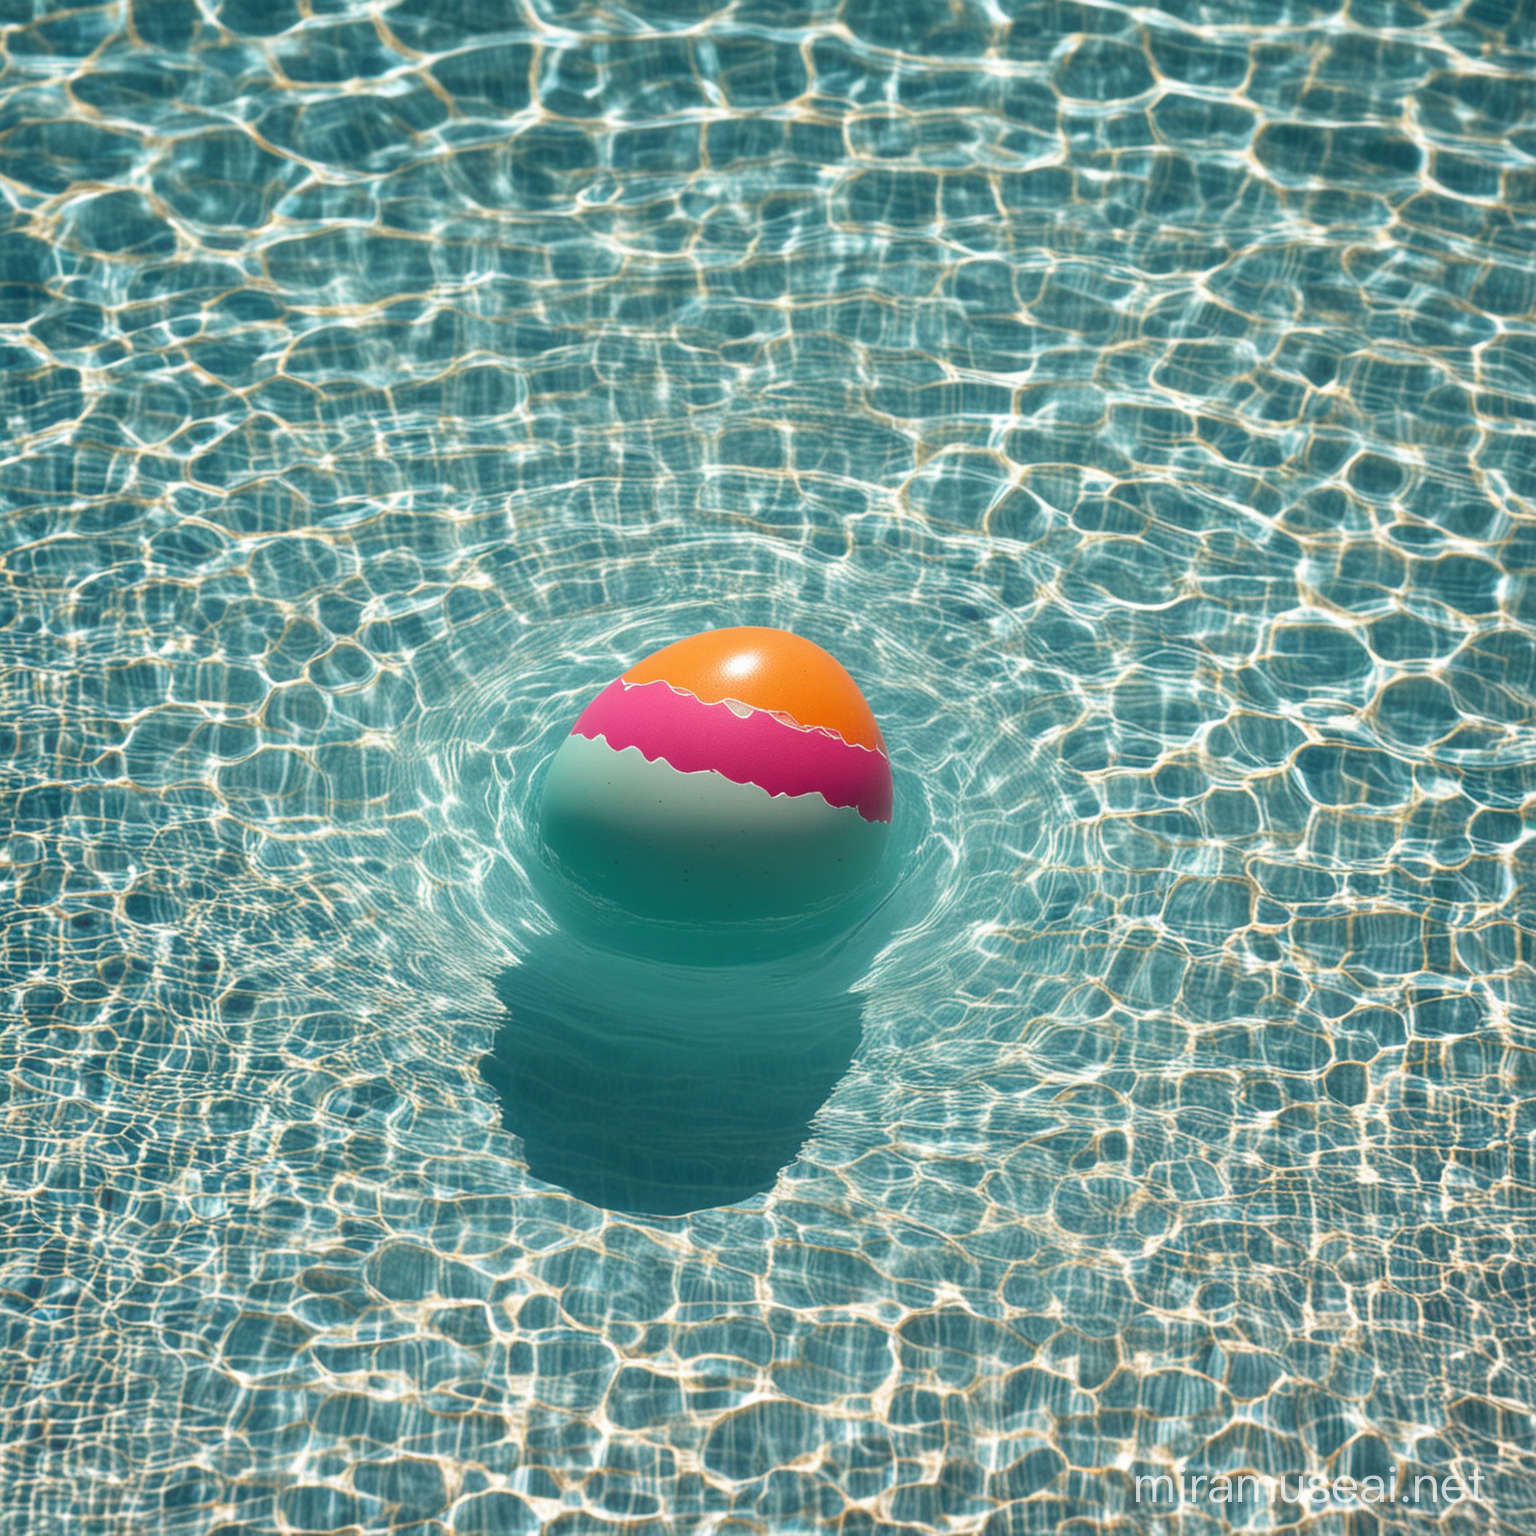 Make me a picture of easter egg half submerged in the swimming poll
